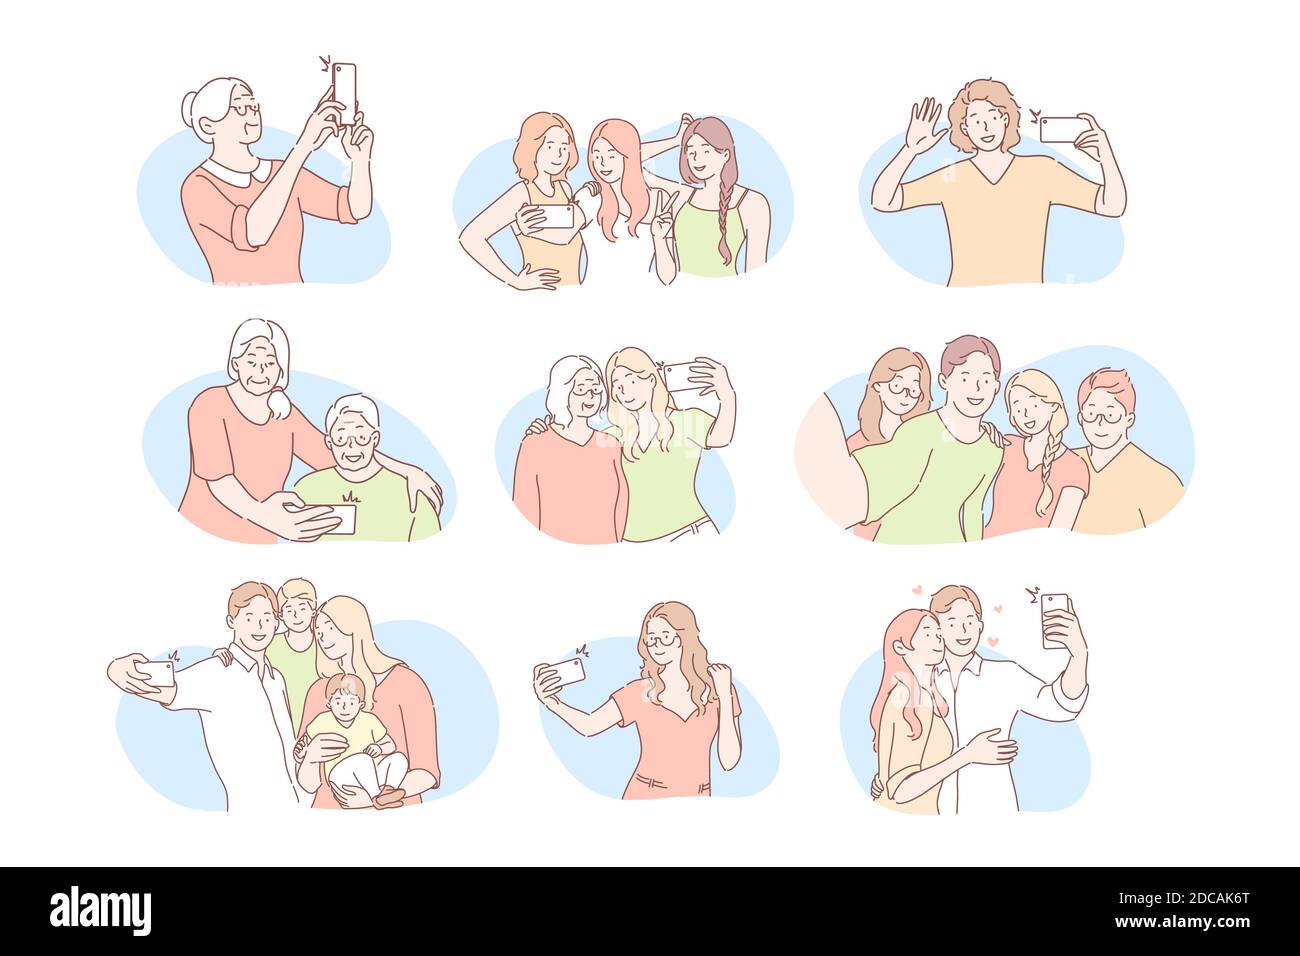 Social media communication, selfie set concept. Collection of young and elder men and women taking selfie using mobile phones. Groups of people make p Stock Vector